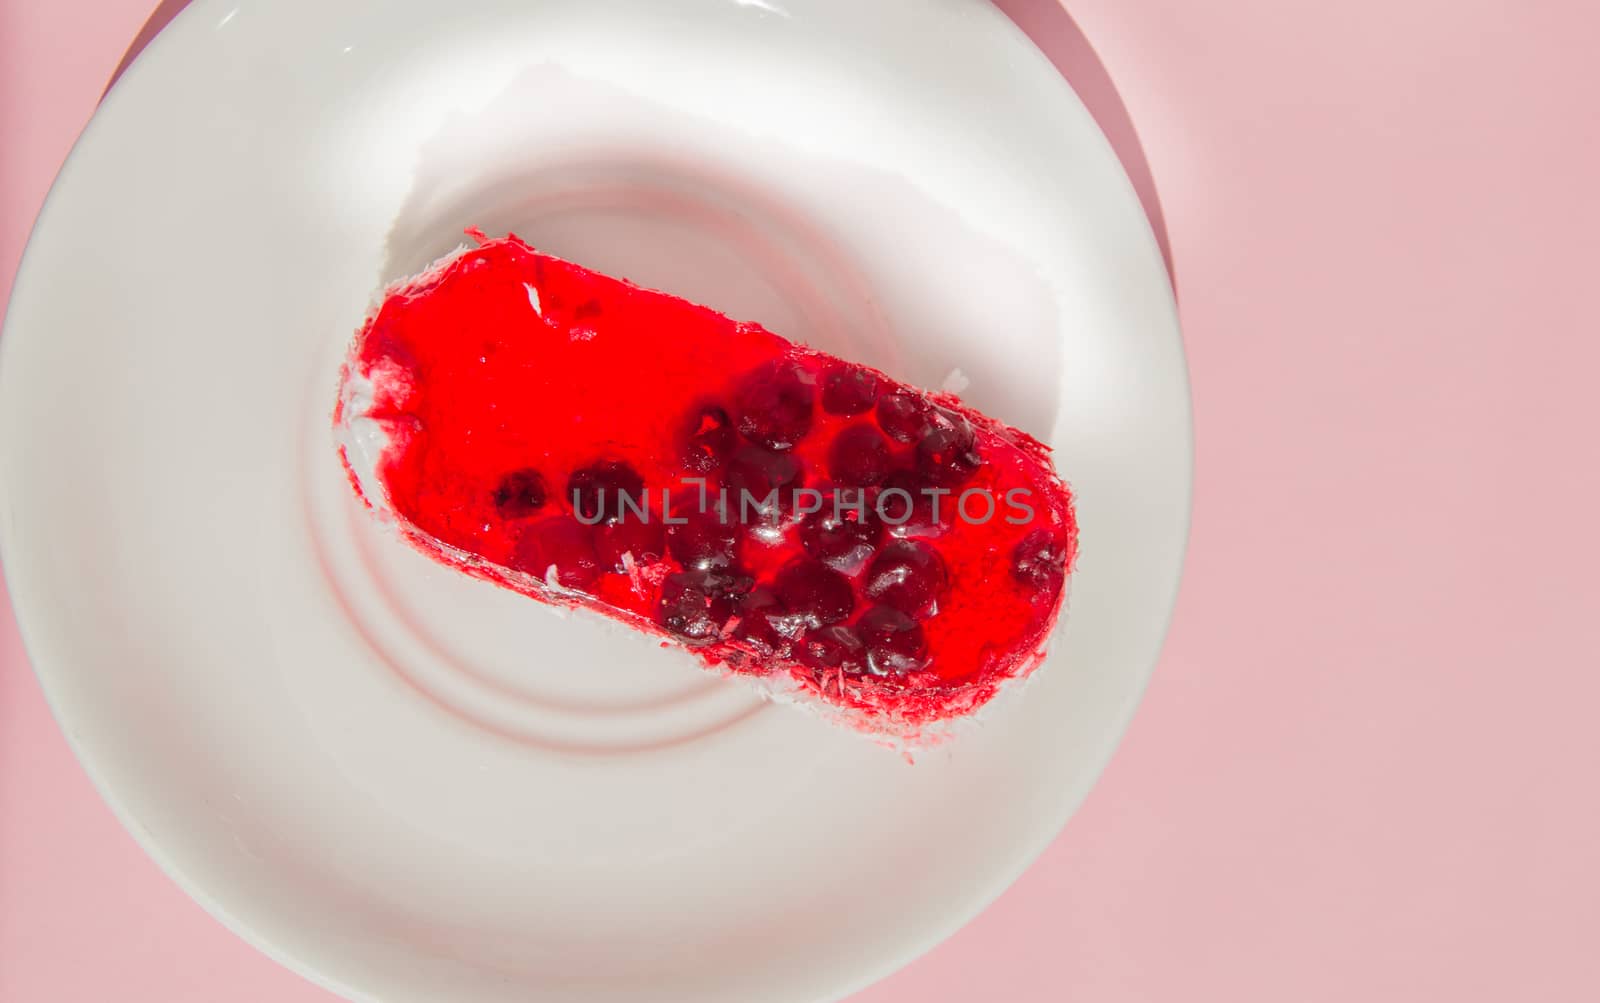 Exquisite souffle cake with lingonberry jelly, with berry glaze and coconut on a white plate, top view close-up, pink background by claire_lucia